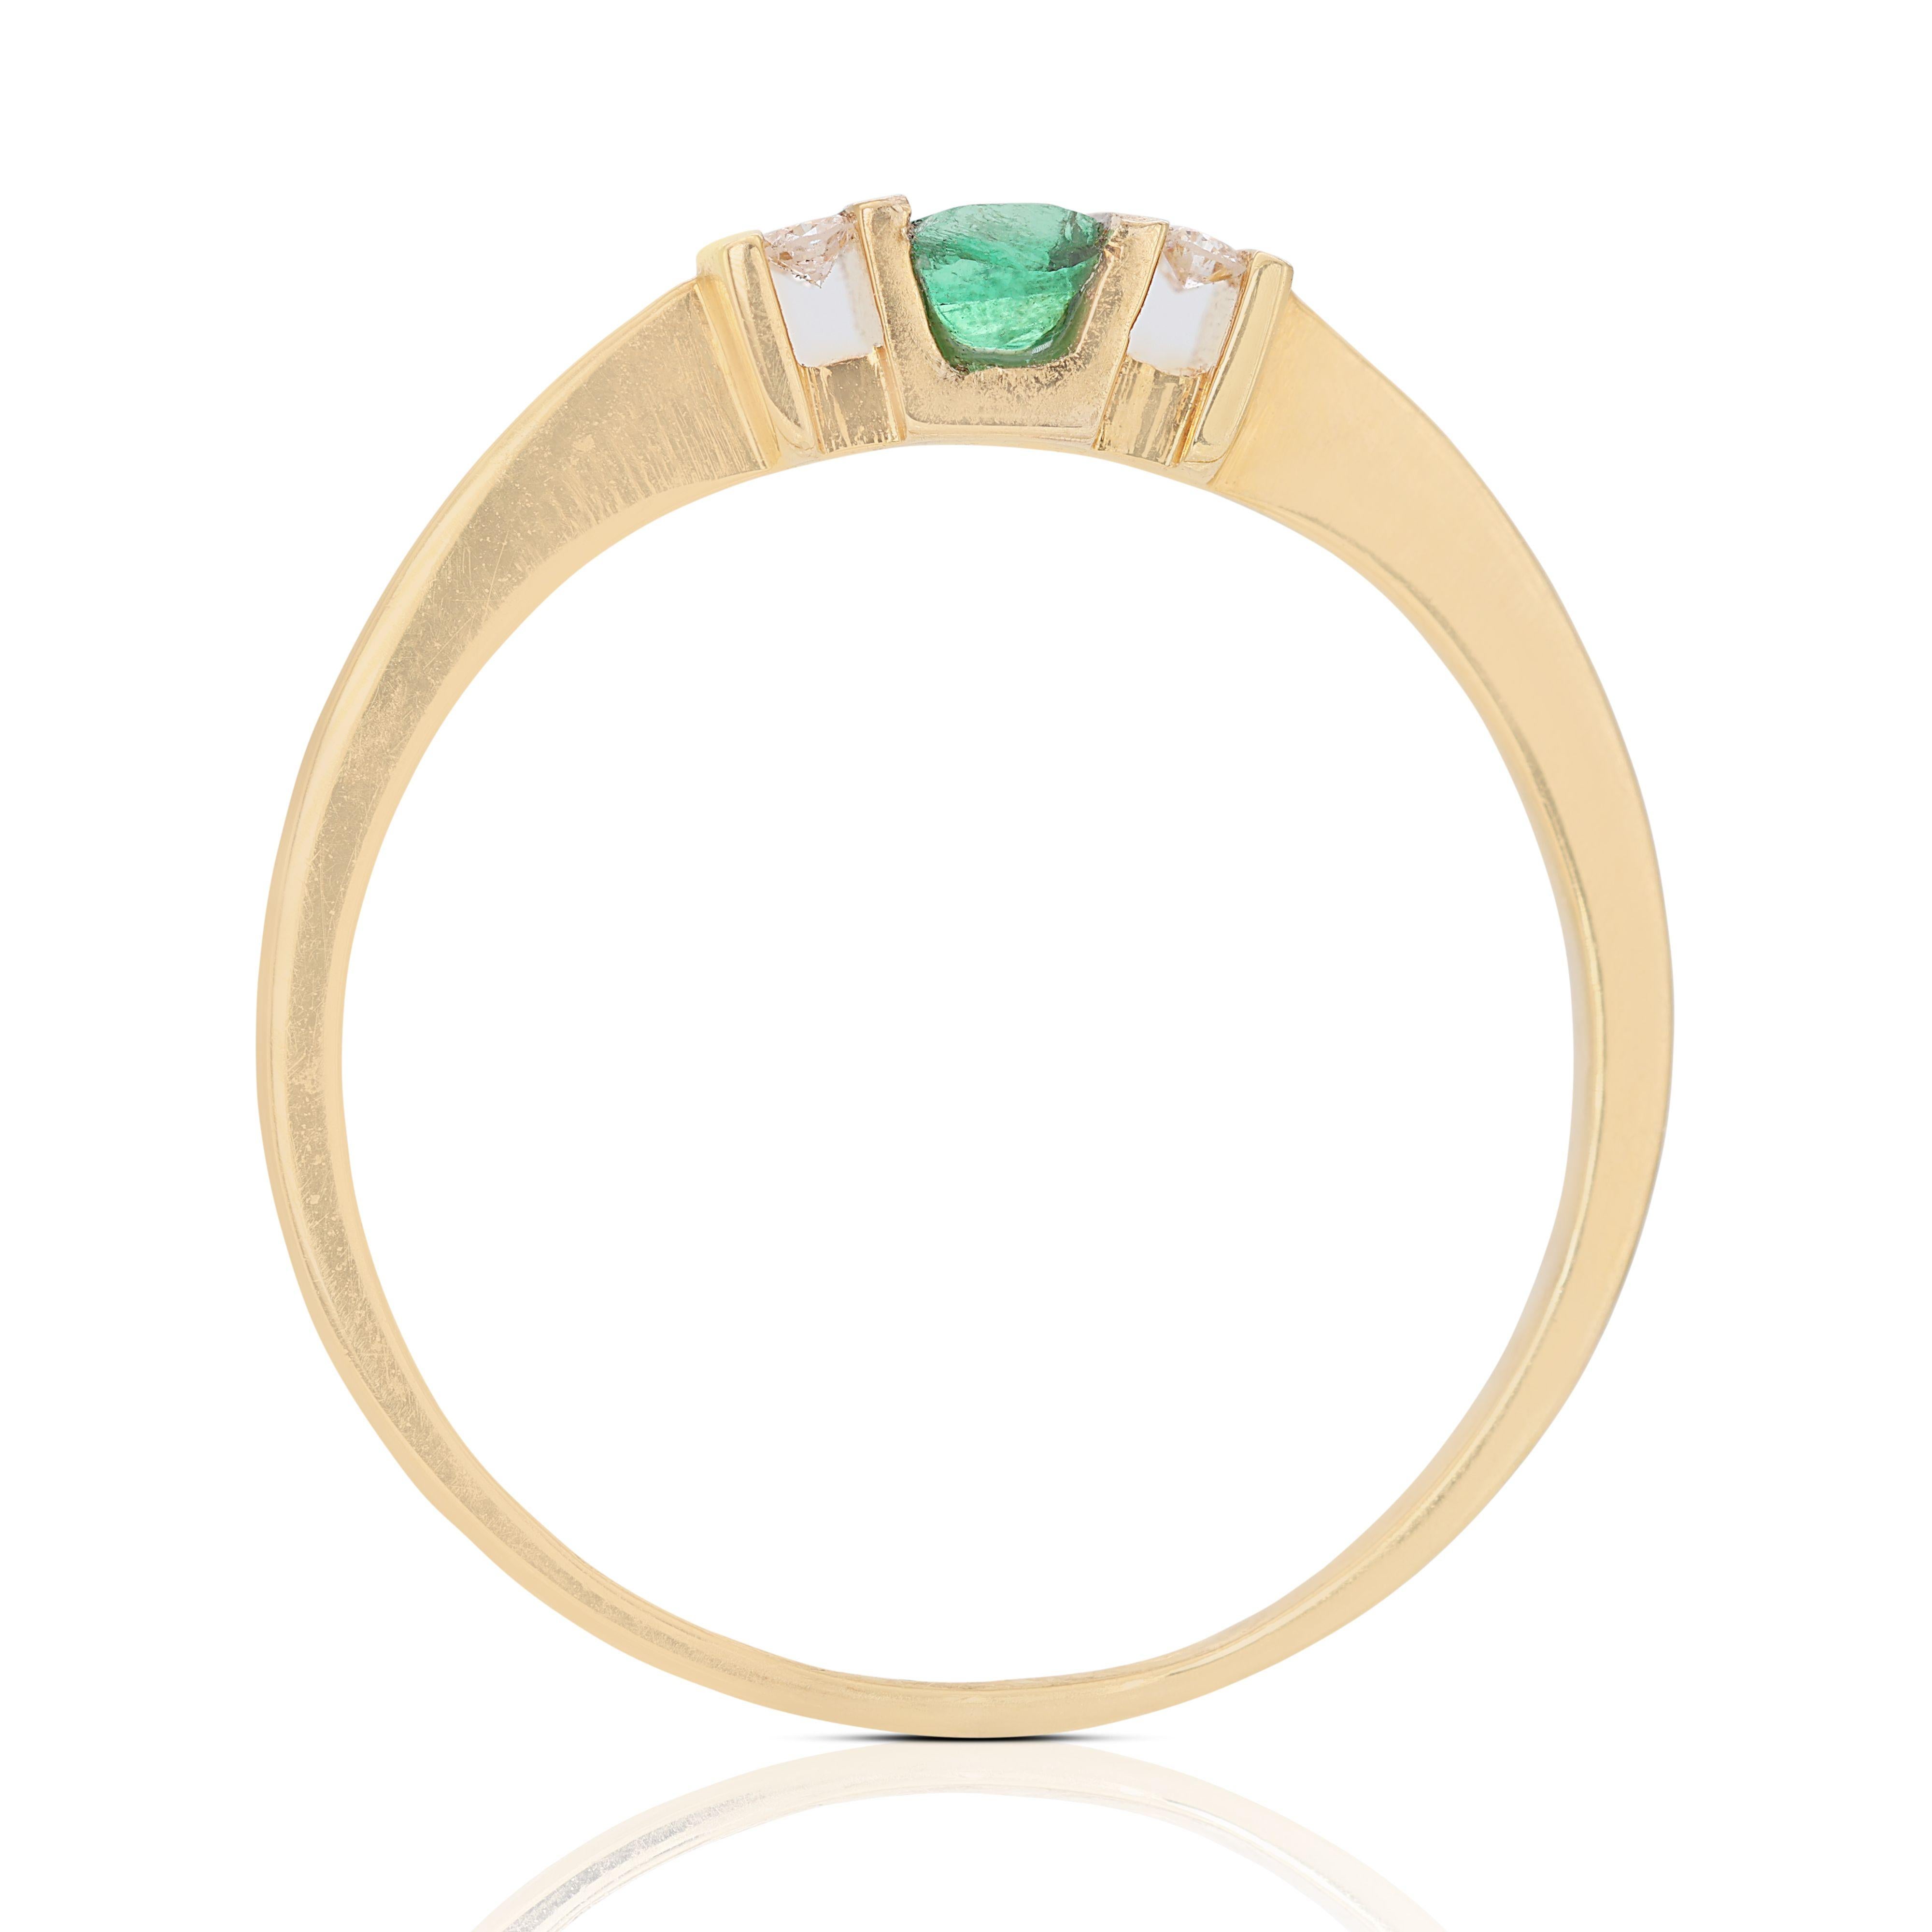 Exquisite 3-stone Emerald Diamond Ring in 18K Yellow Gold For Sale 1